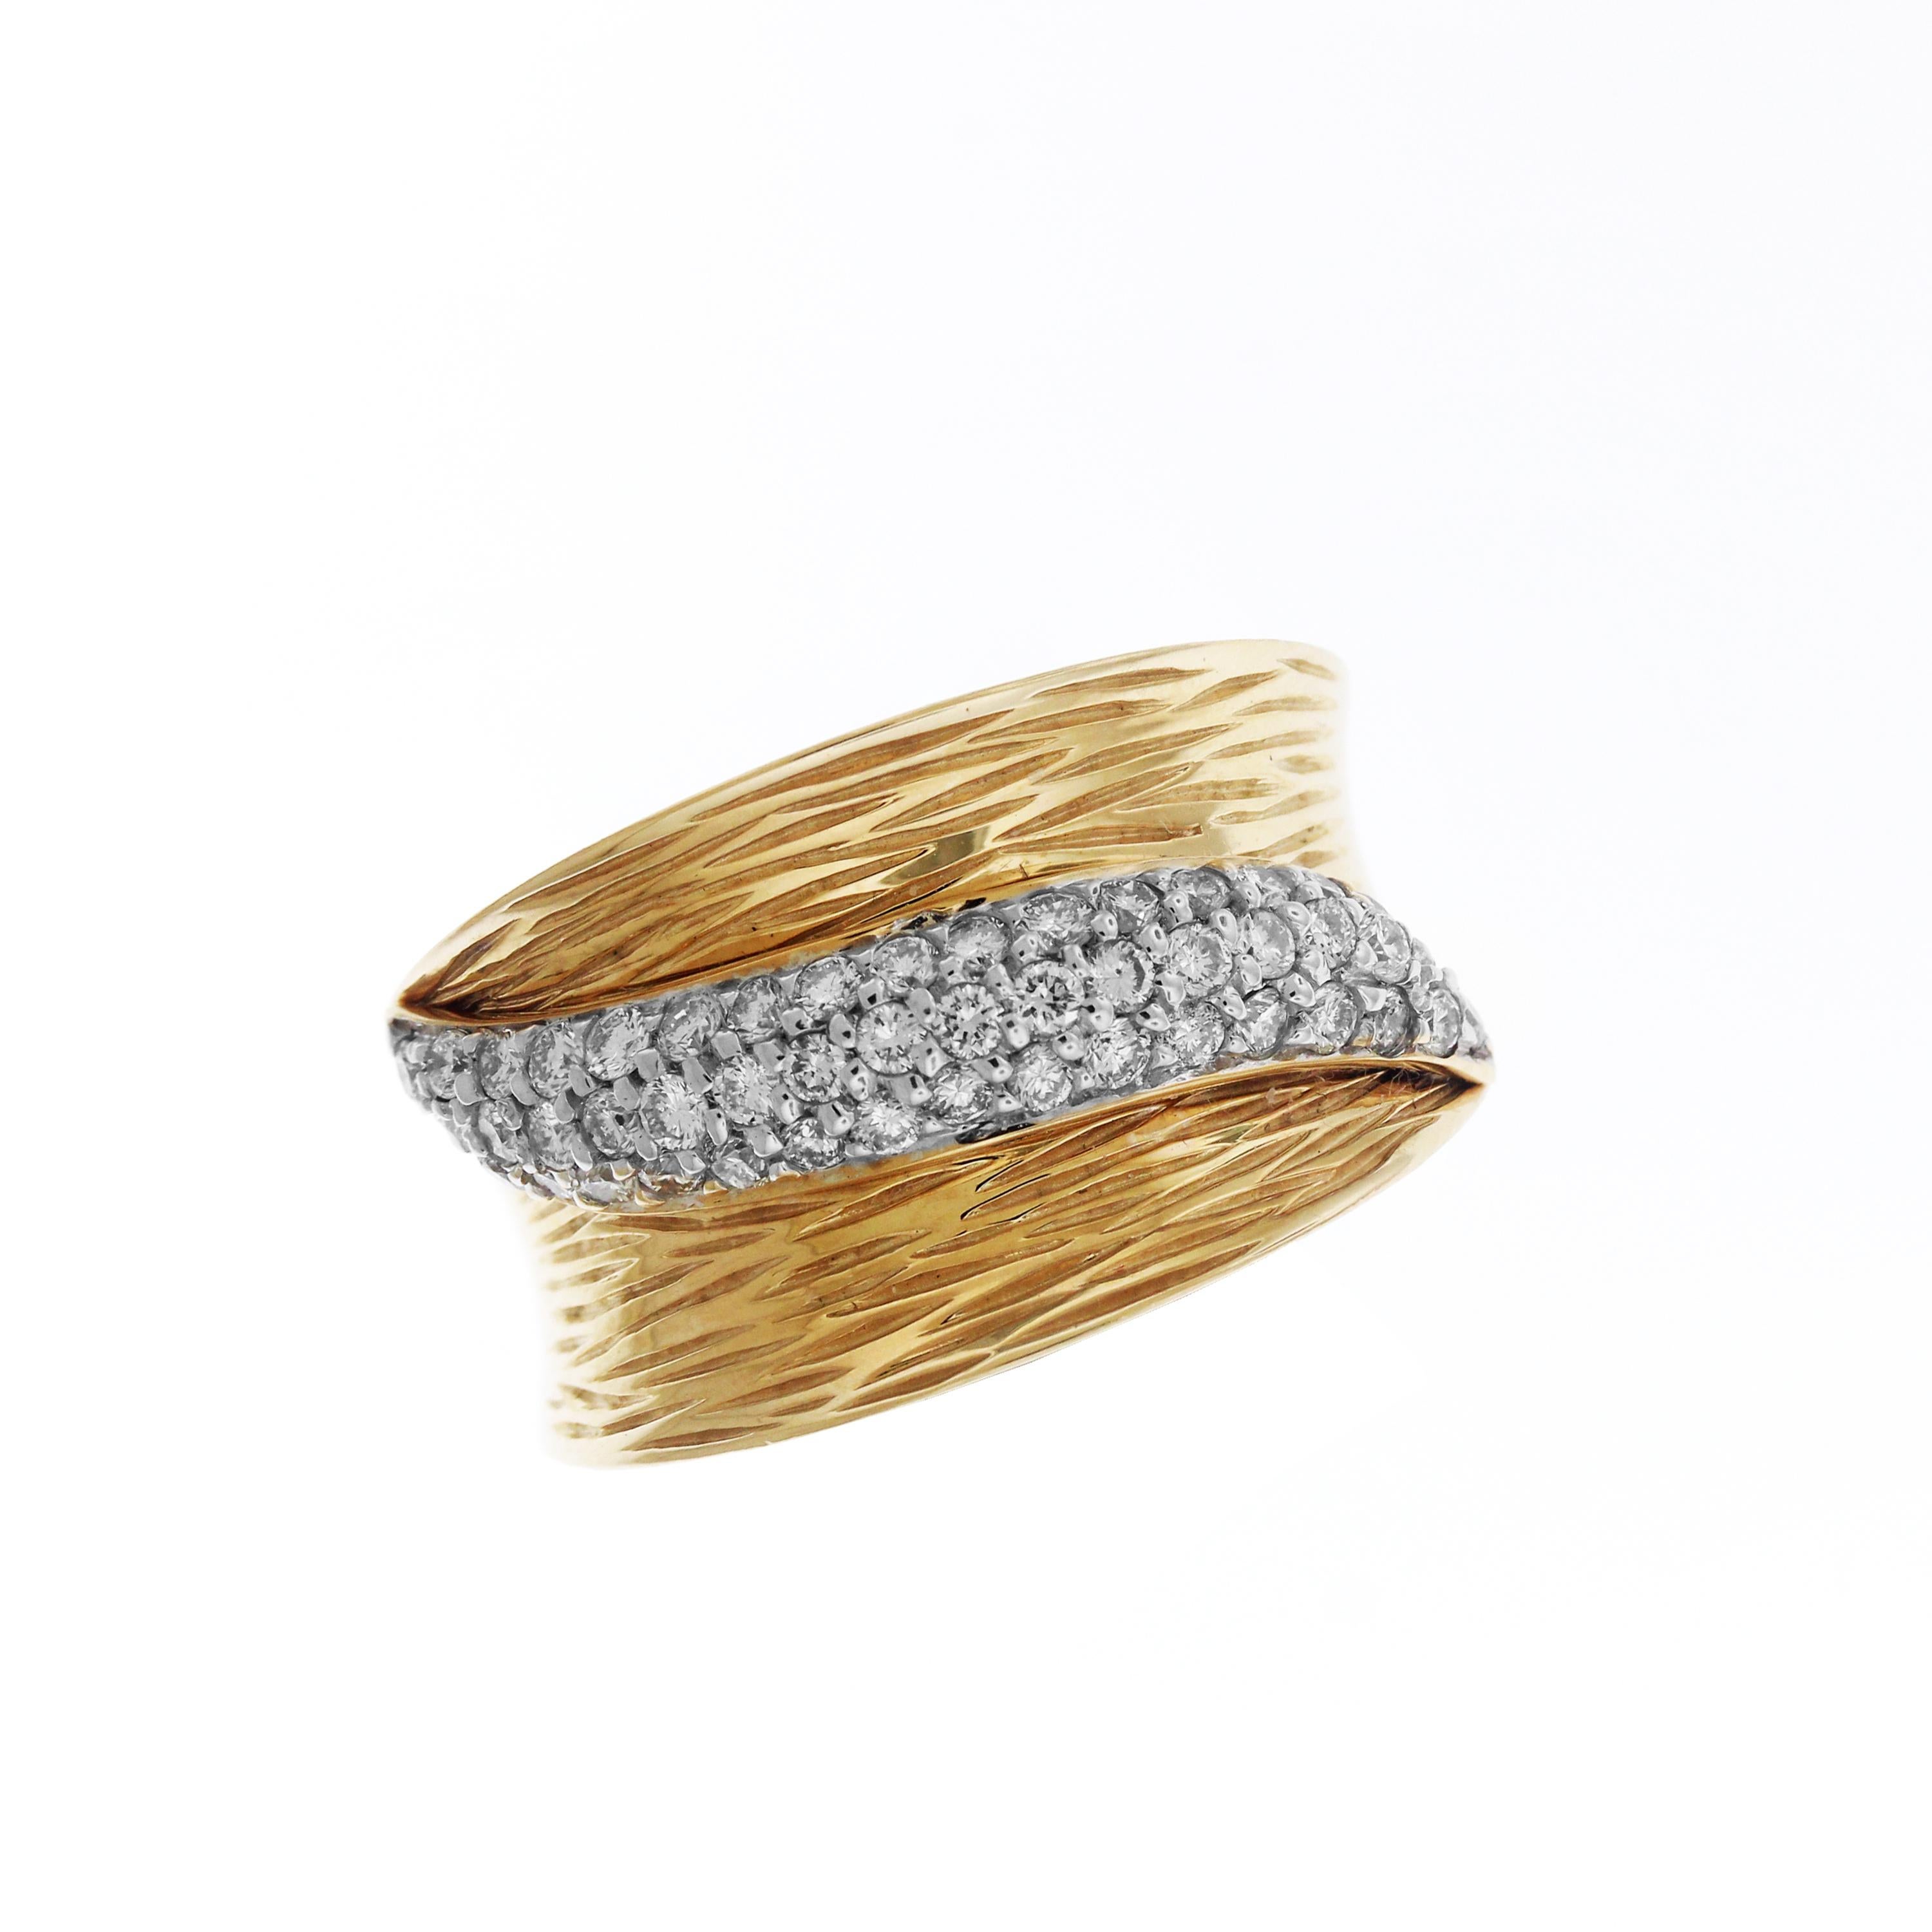 IF YOU ARE REALLY INTERESTED, CONTACT US WITH ANY REASONABLE OFFER. WE WILL TRY OUR BEST TO MAKE YOU HAPPY!

14K Yellow and White Gold Diamond Band Ring 

Ring has a textured band featuring a swoosh of white diamonds

0.5 carat H color, SI clarity